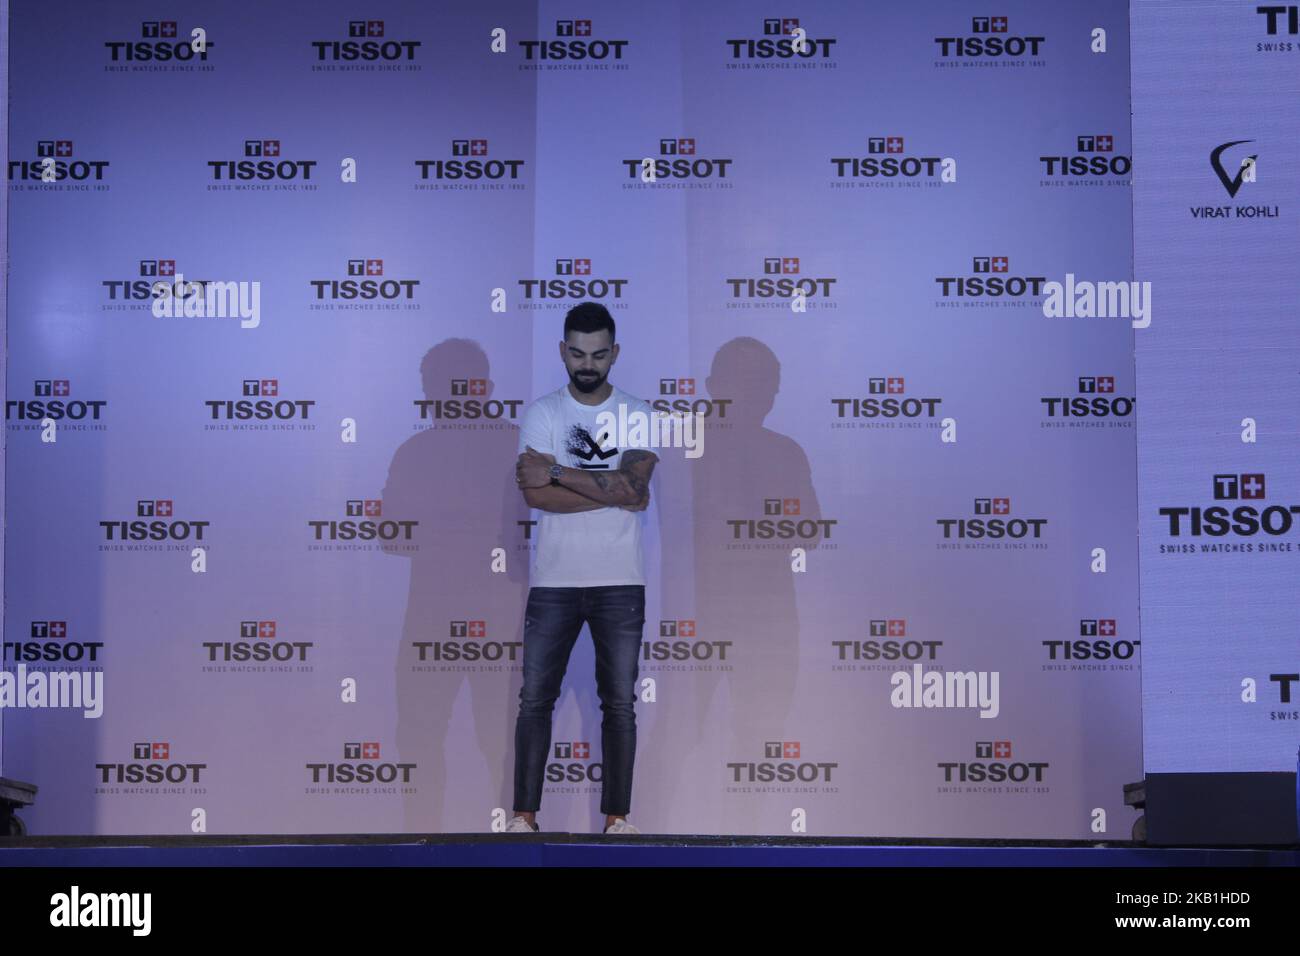 Virat Kolhi an Indian international cricketer who currently captains the India national team at the unveiling of their special edition Tissot CHRONO XL Classic at hotel Taj Land Ends in Mumbai on September 26, 2018. The Tissot Chrono XL Classic edited especially for Virat Kohli embodies a unique set of customizations that personify Tissot Ambassador. Known as the Tissot Chrono XL Classic Virat Kohli 2018, the watch features his navy blue logo engraved on its white silk-printed caseback and a navy blue leather strap enhances the sporty aesthetics of this special edition. The stopwatch number 20 Stock Photo